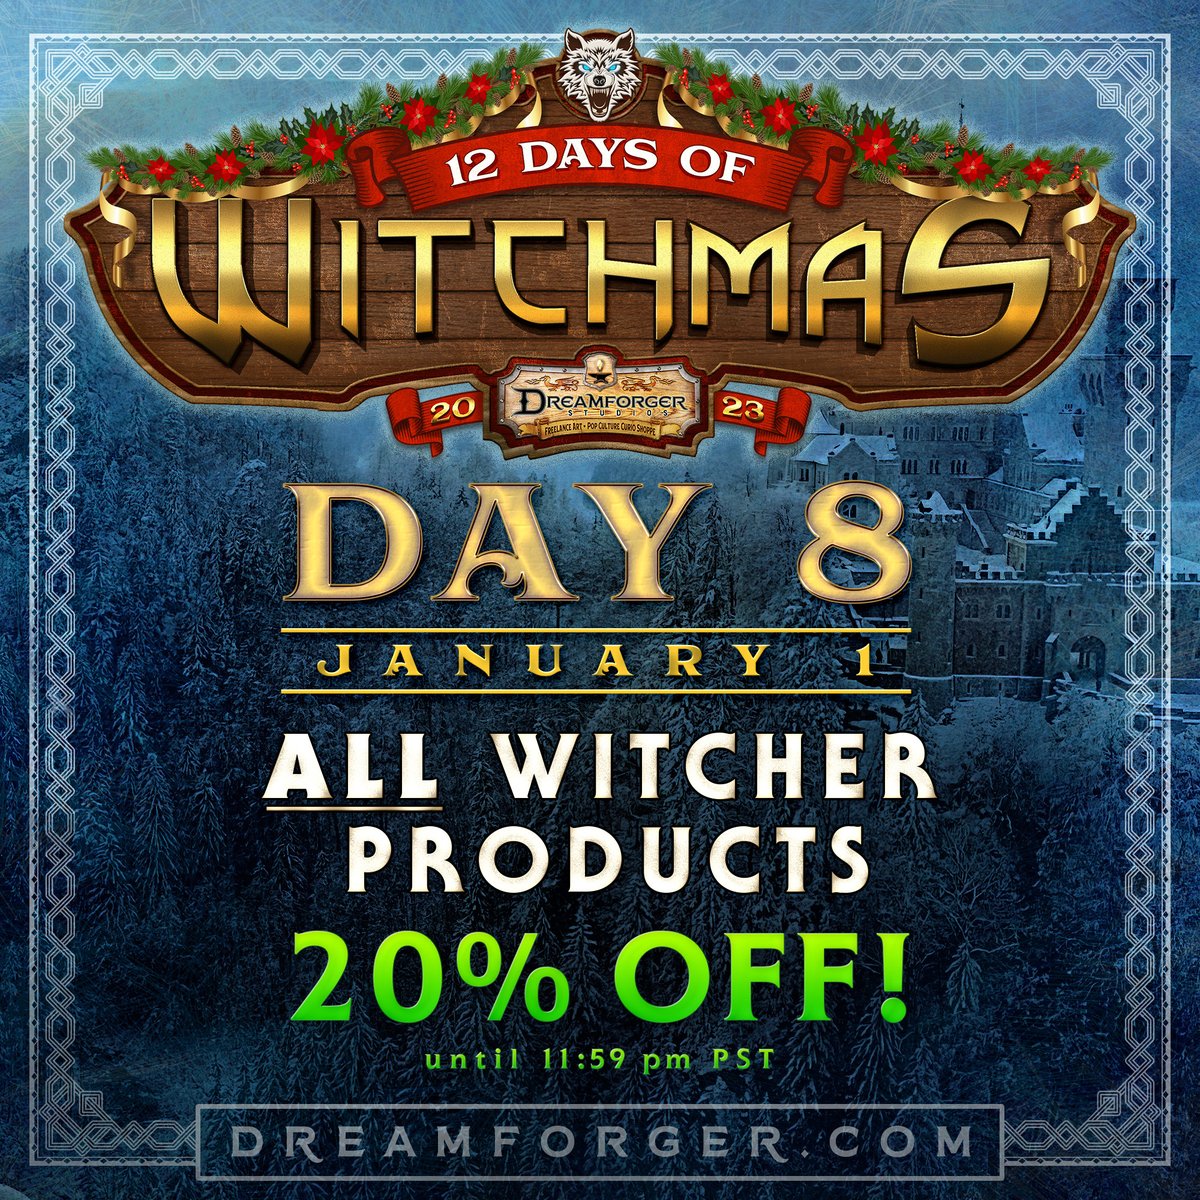 #HappyNewYear Everyone!
Day 8 of #Witchmas is here! Save 20% off ALL my Witcher-inspired art & collectibles. Ring in the new year Witcher-style!
ow.ly/FN7E50QlPzC
#NickKremenekArt #DreamforgerStudios #TheWitcher #GeraltOfRivia